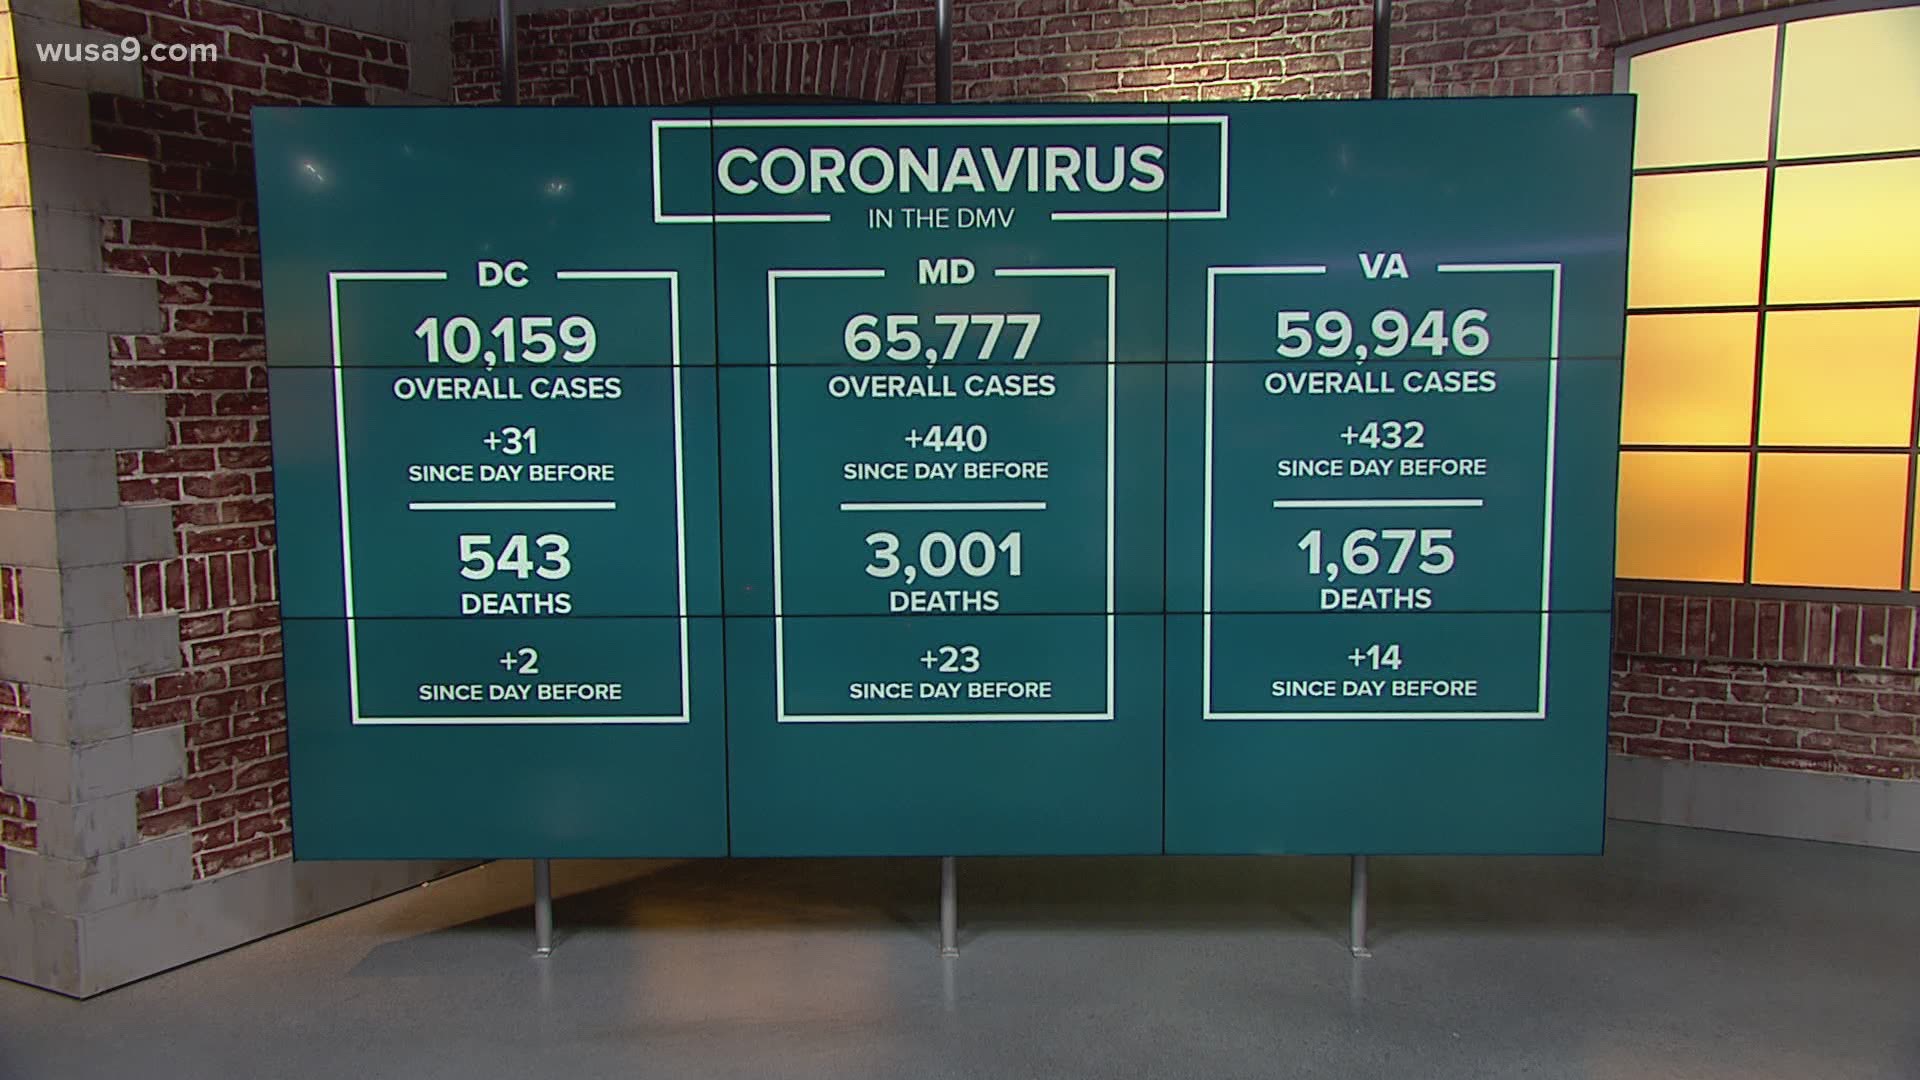 3,000 people have now died in the state of Maryland due to the coronavirus pandemic